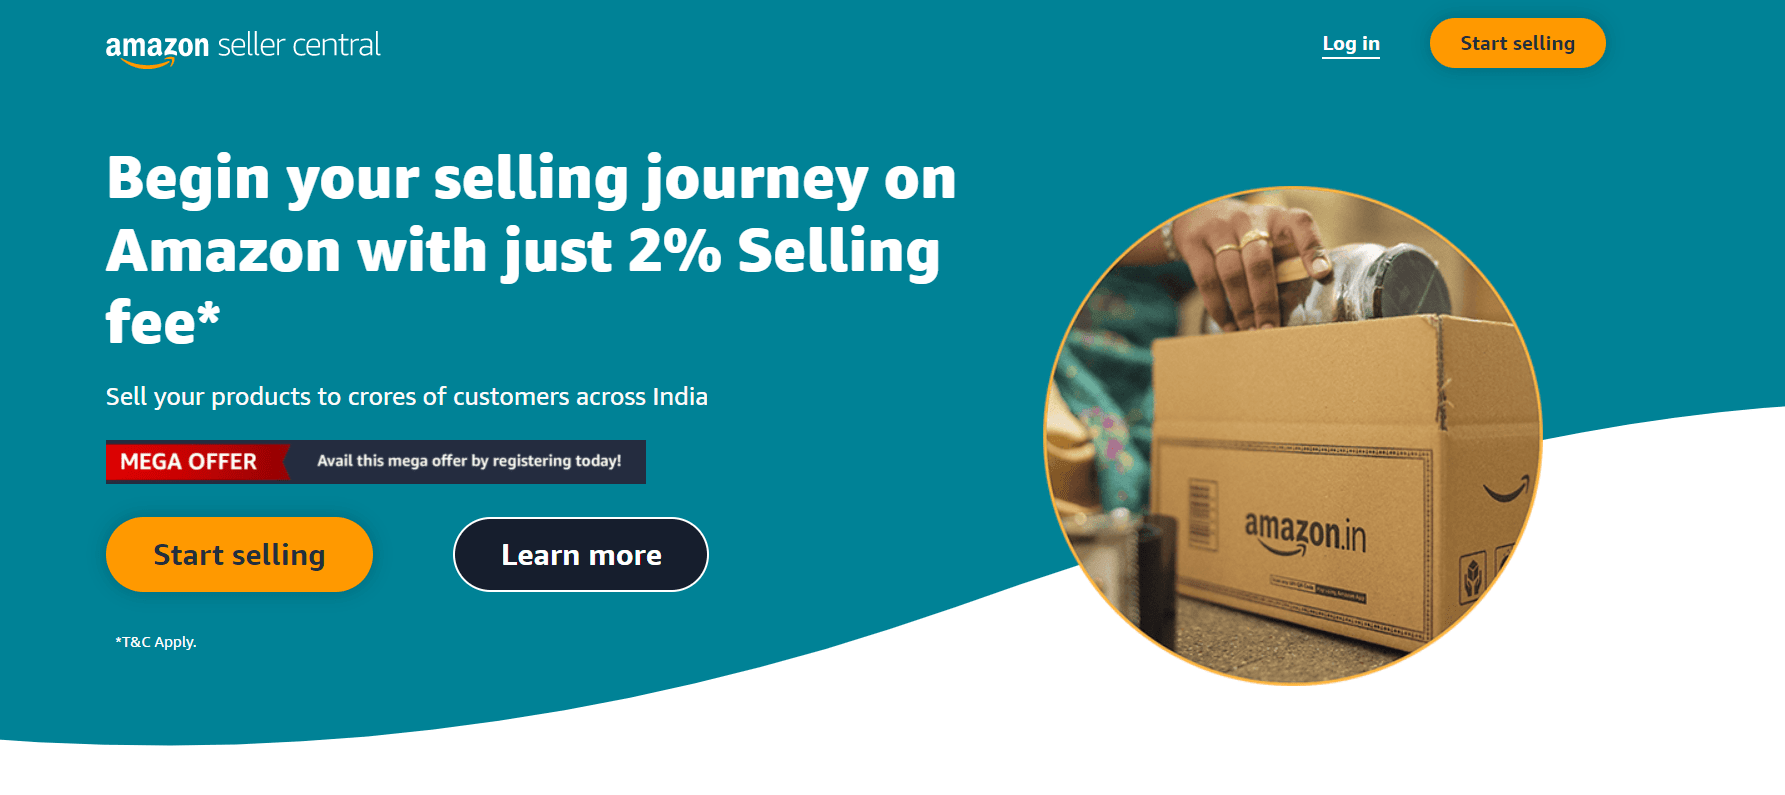 How Much Can You Make Selling On Amazon - amazon seller